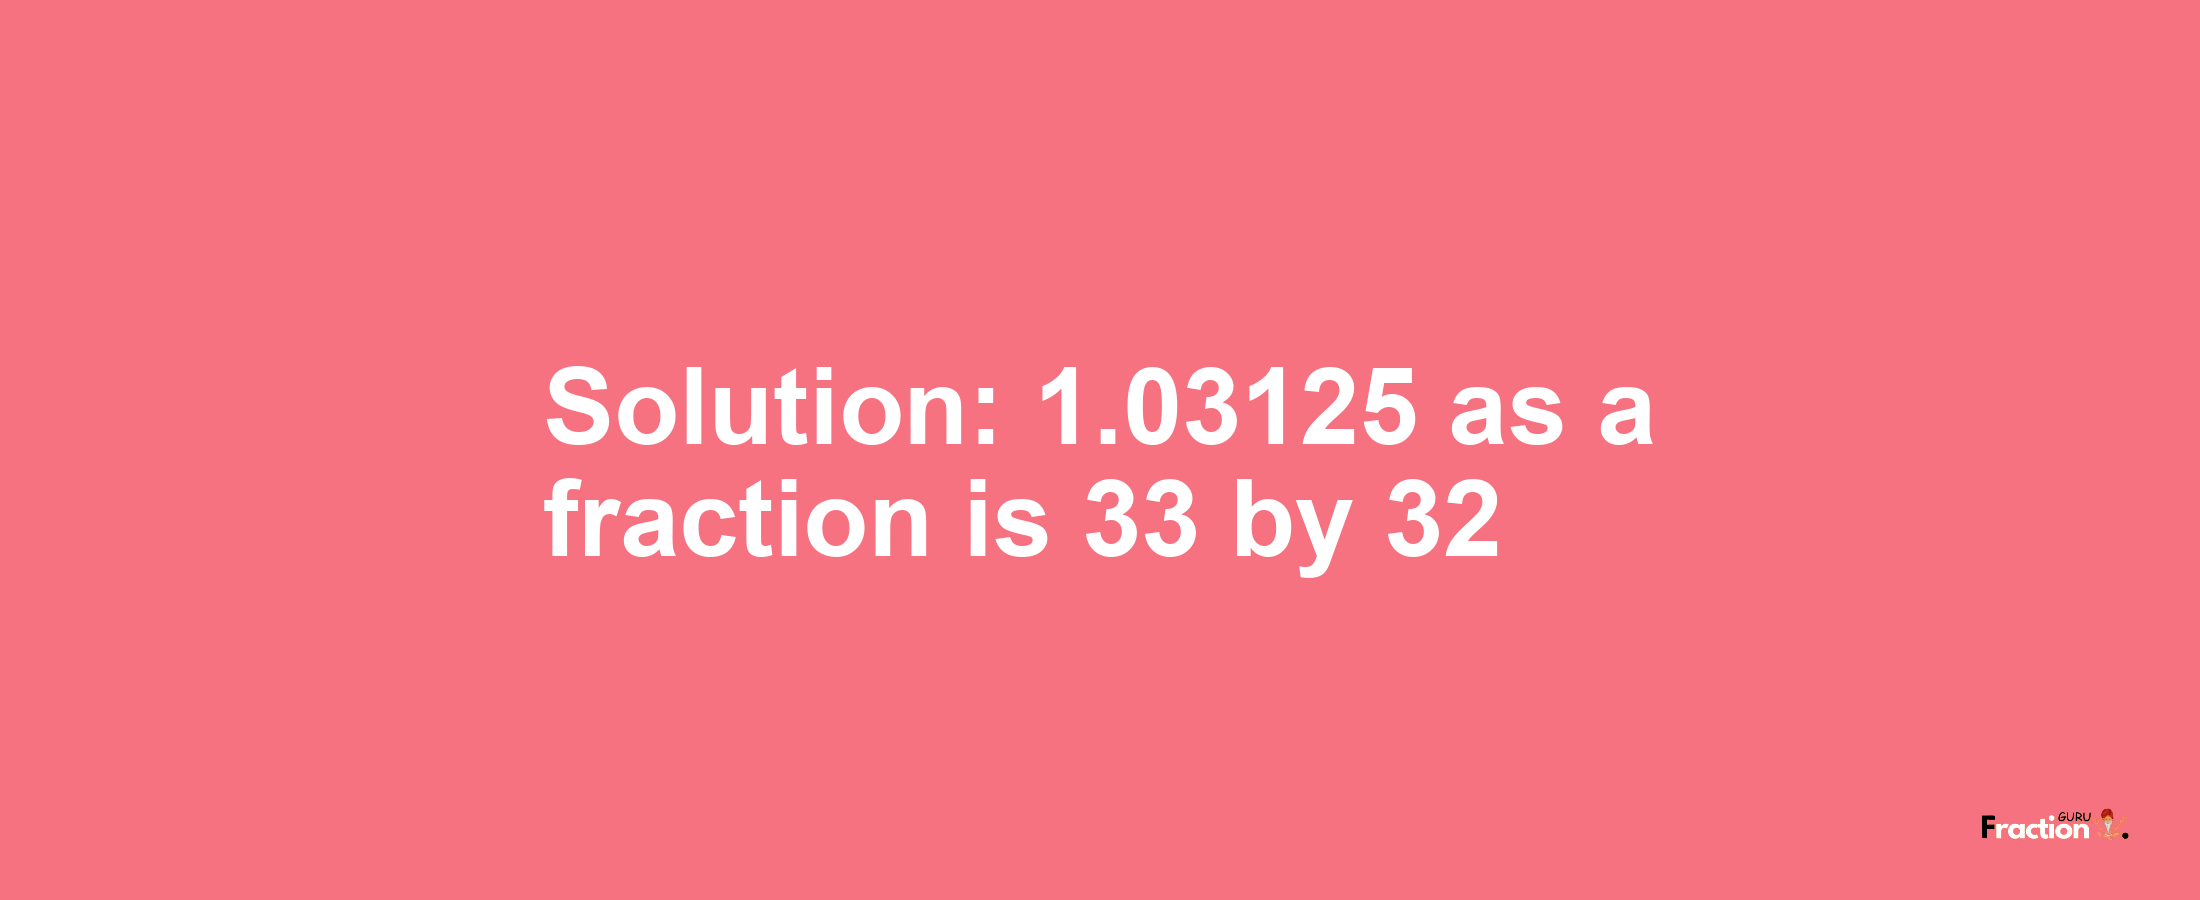 Solution:1.03125 as a fraction is 33/32